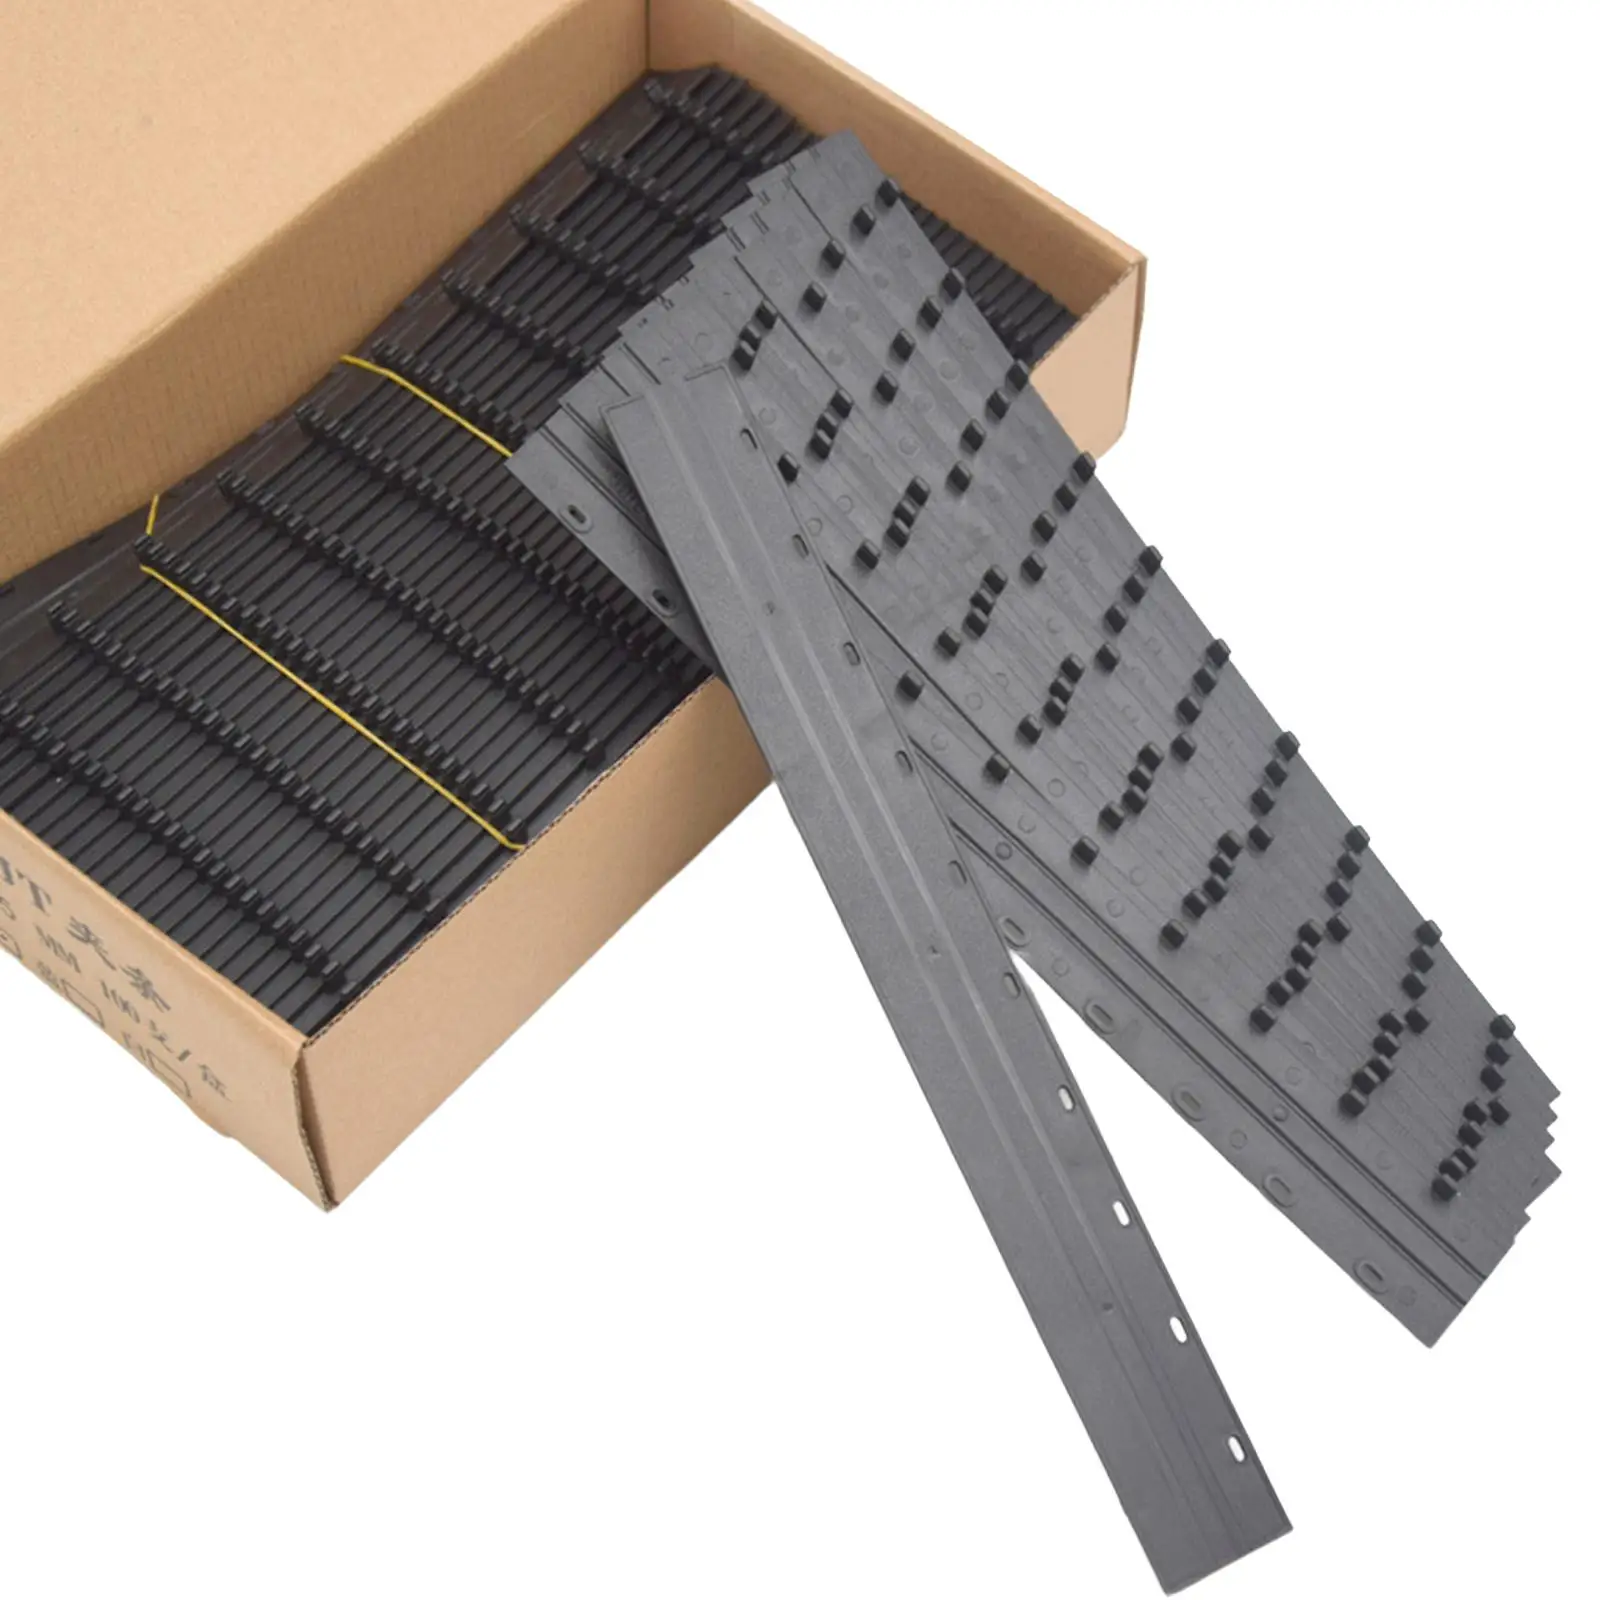 

100Pcs Binding Bars 10mm 12 inch Durable Binder Accessories 80 Sheets Capacity Black for files Contracts Report Documents School